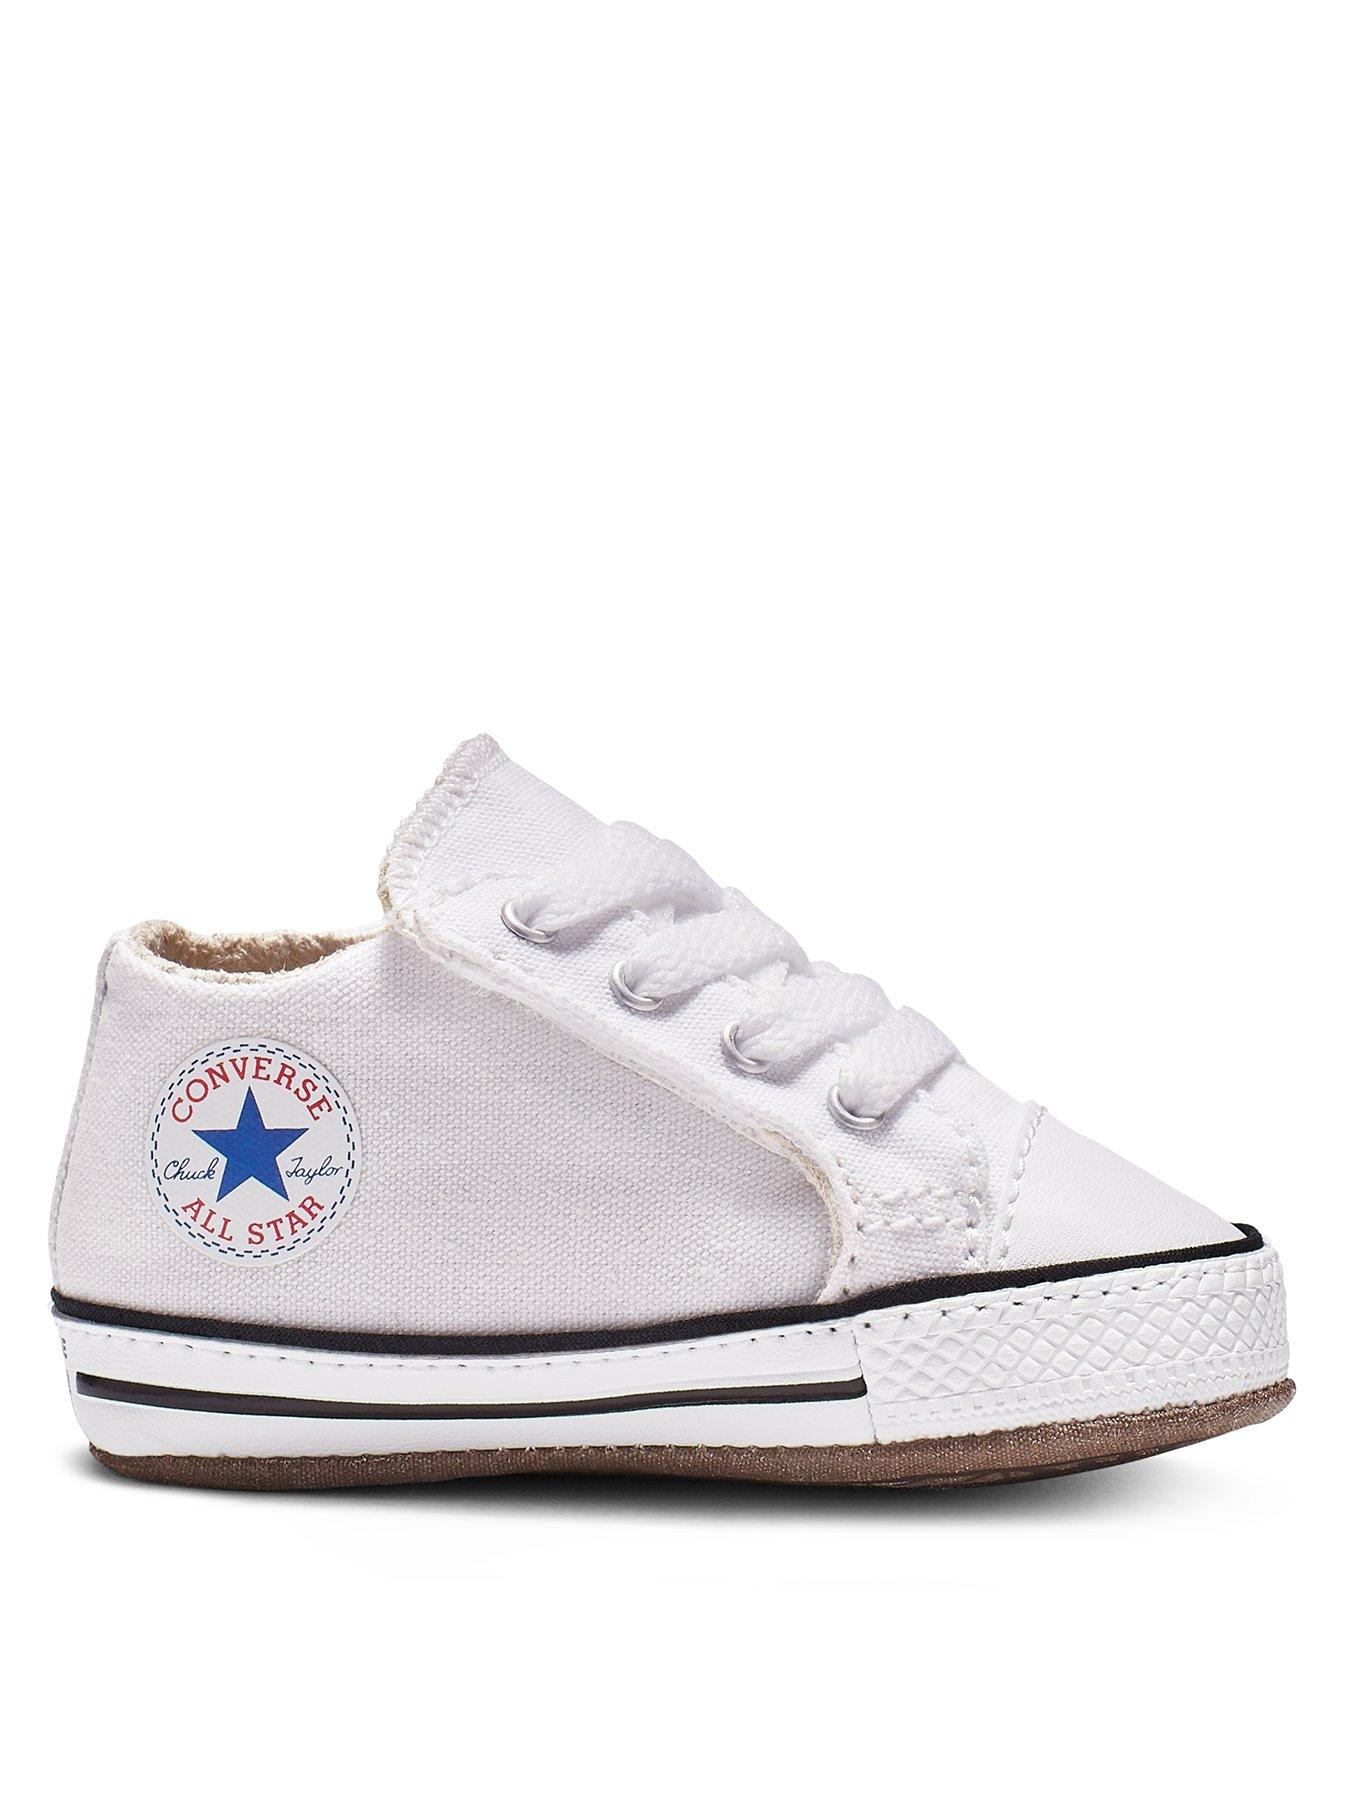 Kids Chuck Taylor All Star Ox Crib Unisex Cribster Canvas Trainers -White